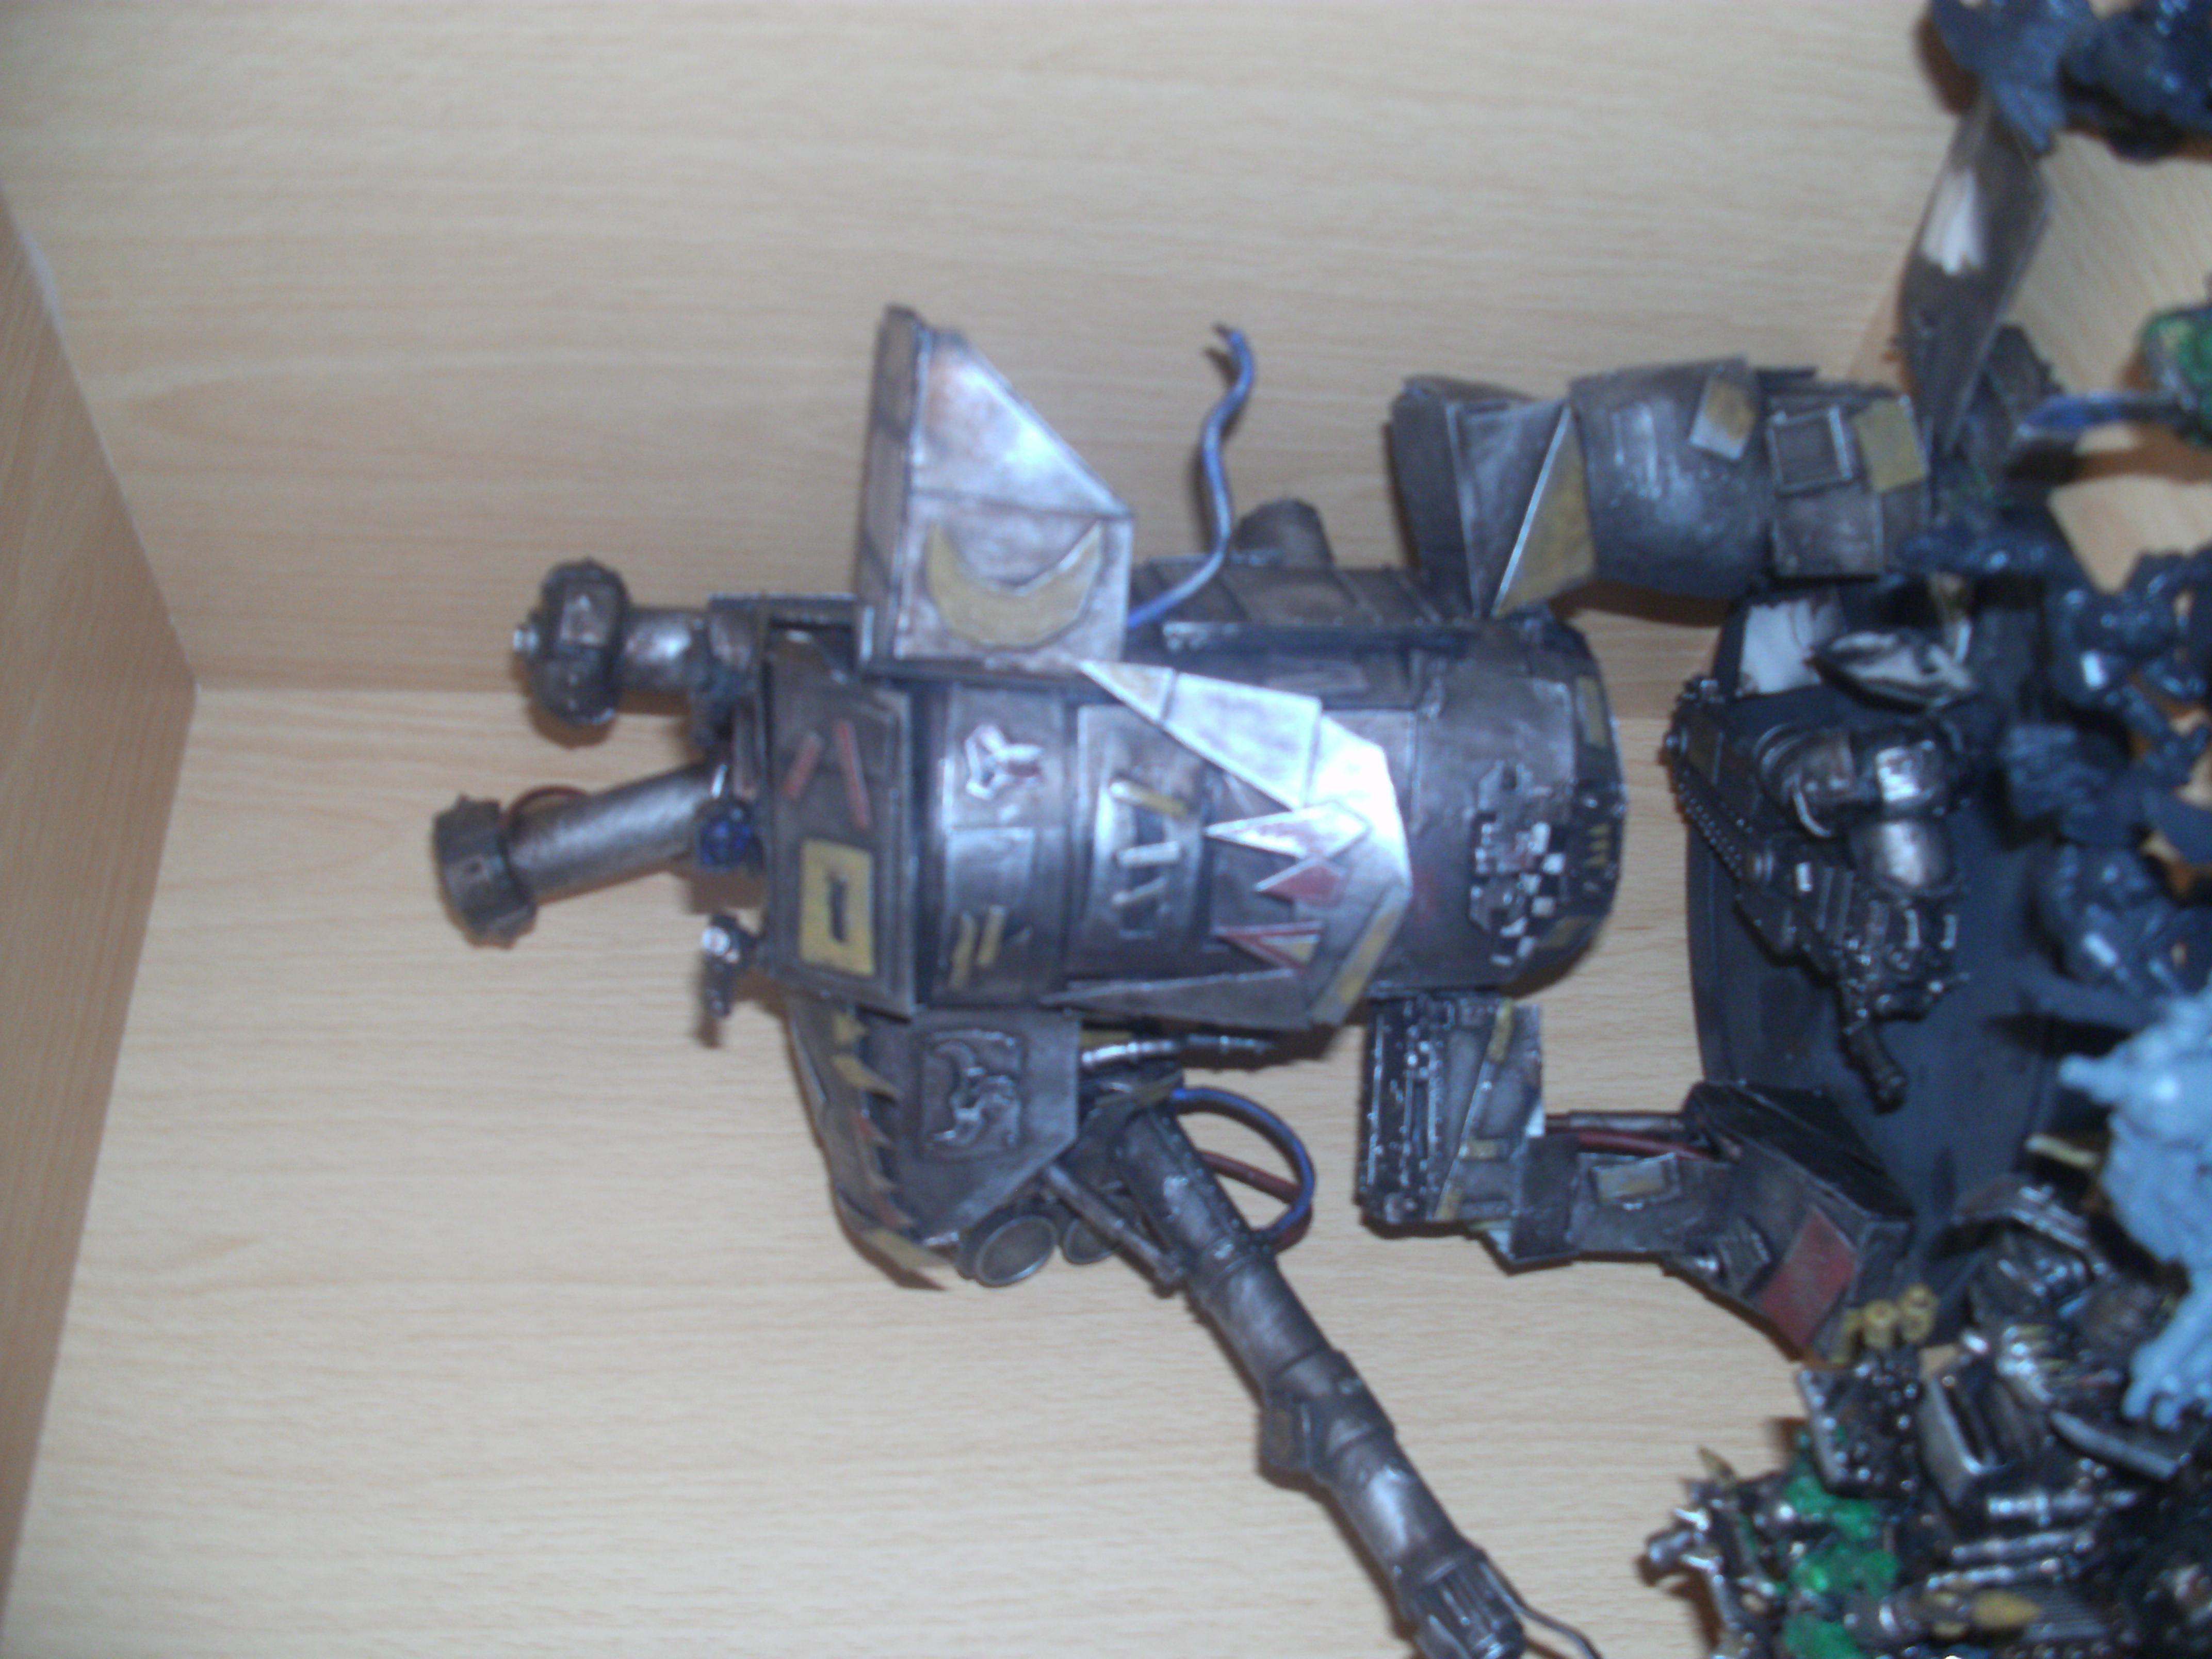 alas my broken mega dread that is too big and now a stompa :'(